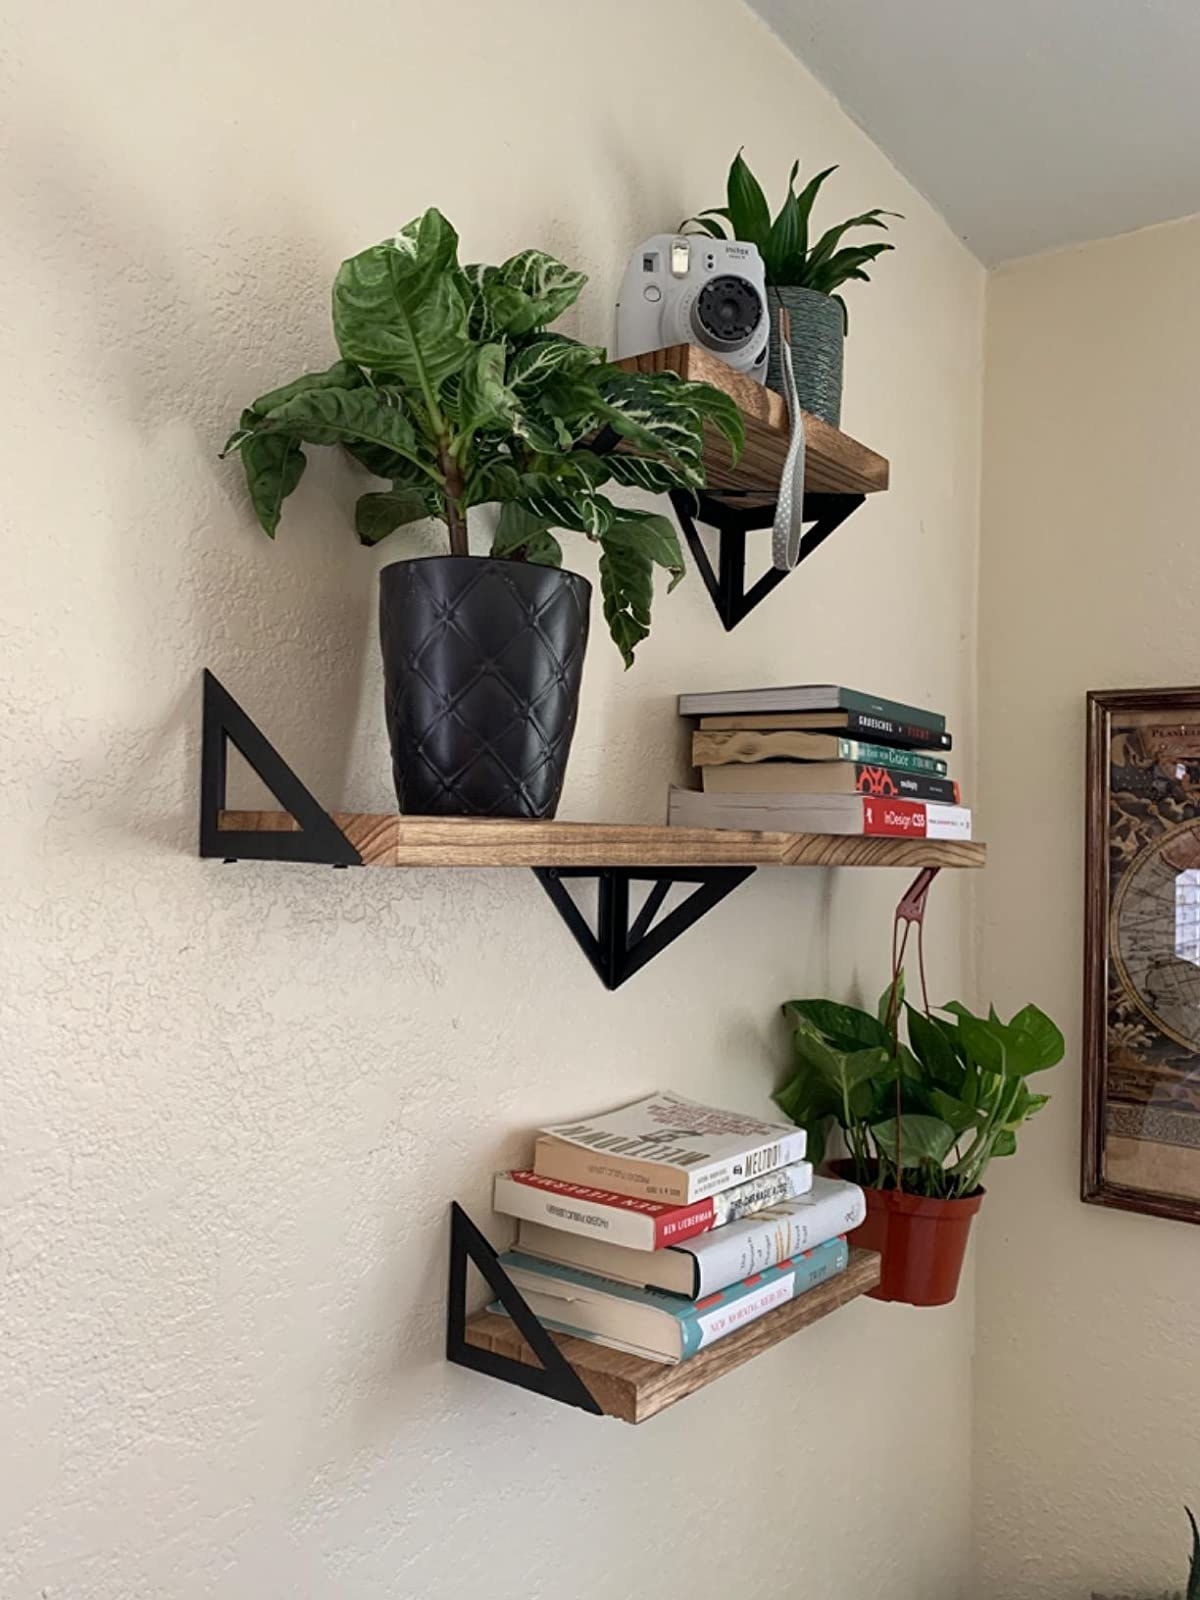 three of the wooden shelves hanging on the wall with books and plants on them